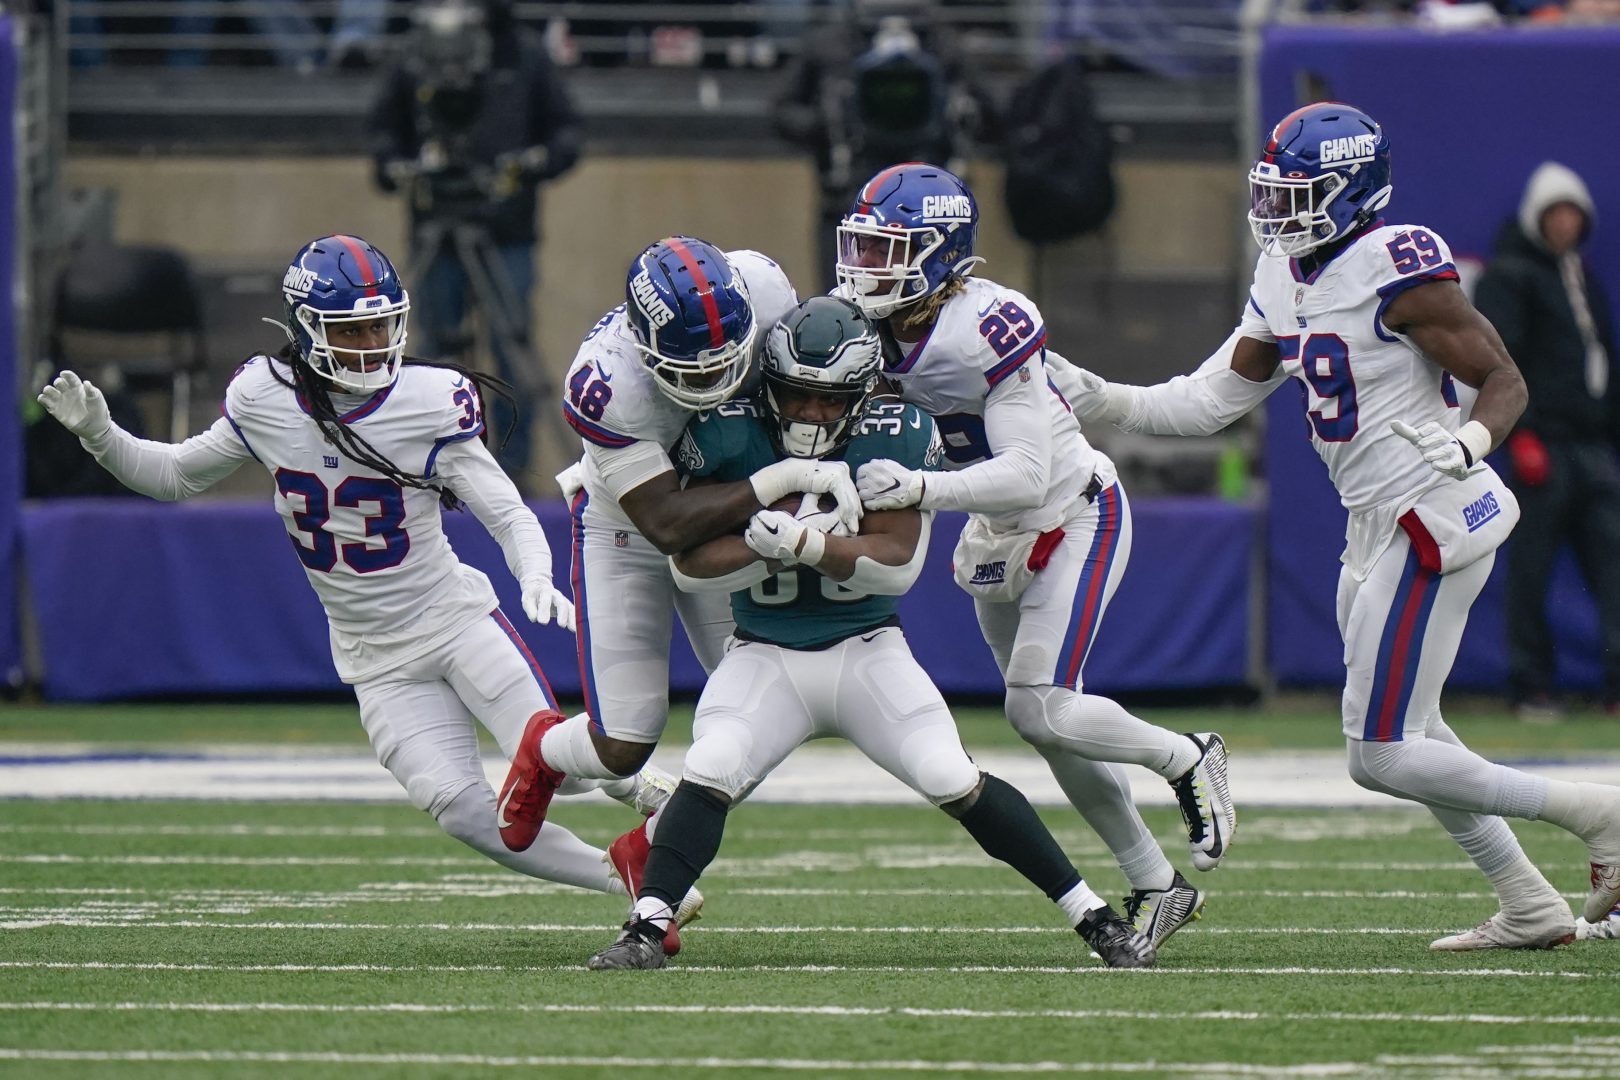 Giants defense forces 4 turnovers in upset of Eagles